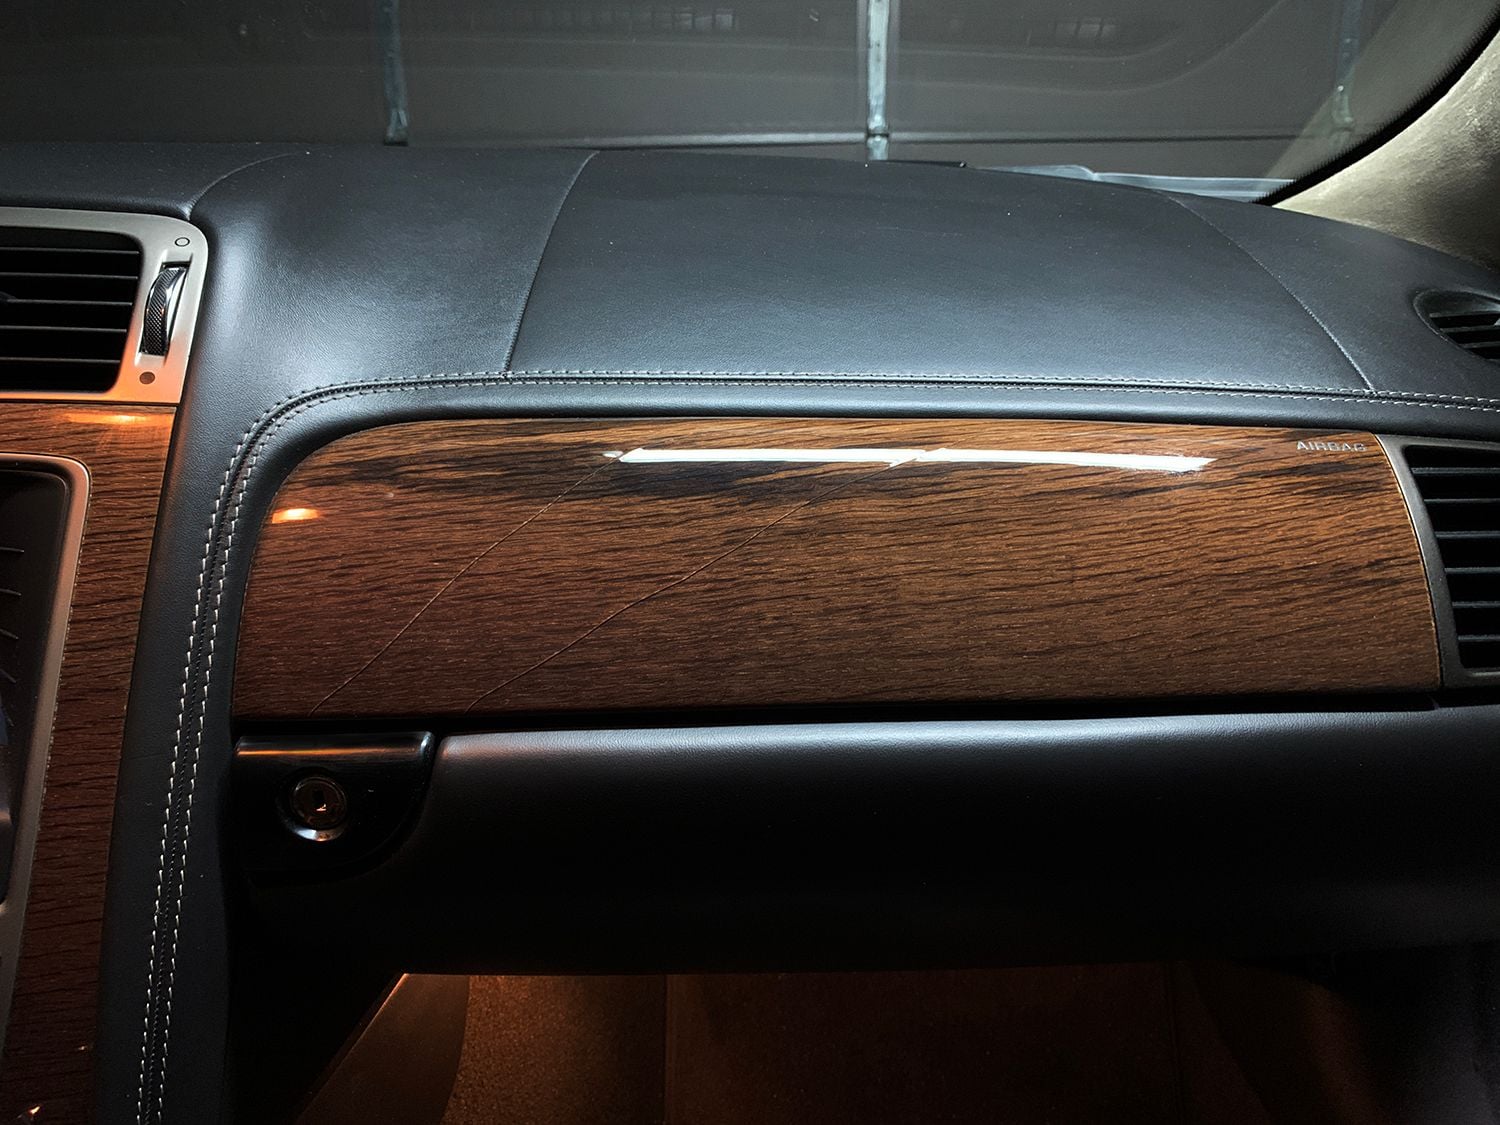 Interior/Upholstery - Wanted: Rick Oak Wood Piece above glove compartment - New or Used - 2010 to 2011 Jaguar XK - Atlanta, GA 30080, United States